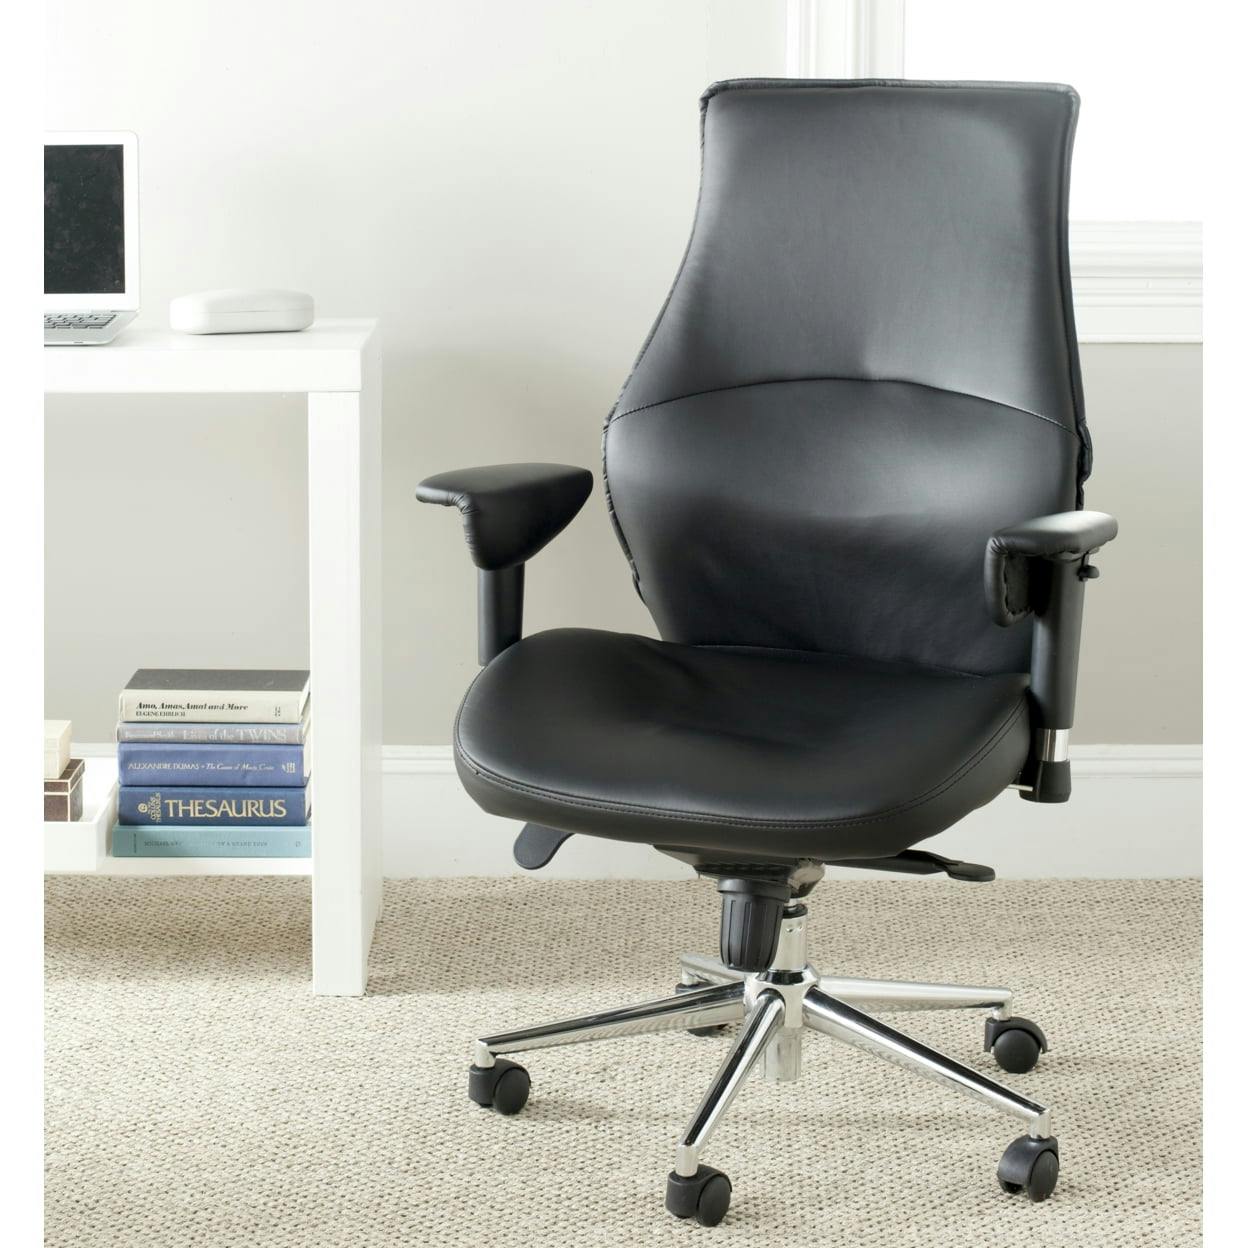 Transitional High-Back Swivel Desk Chair in Luxurious Black